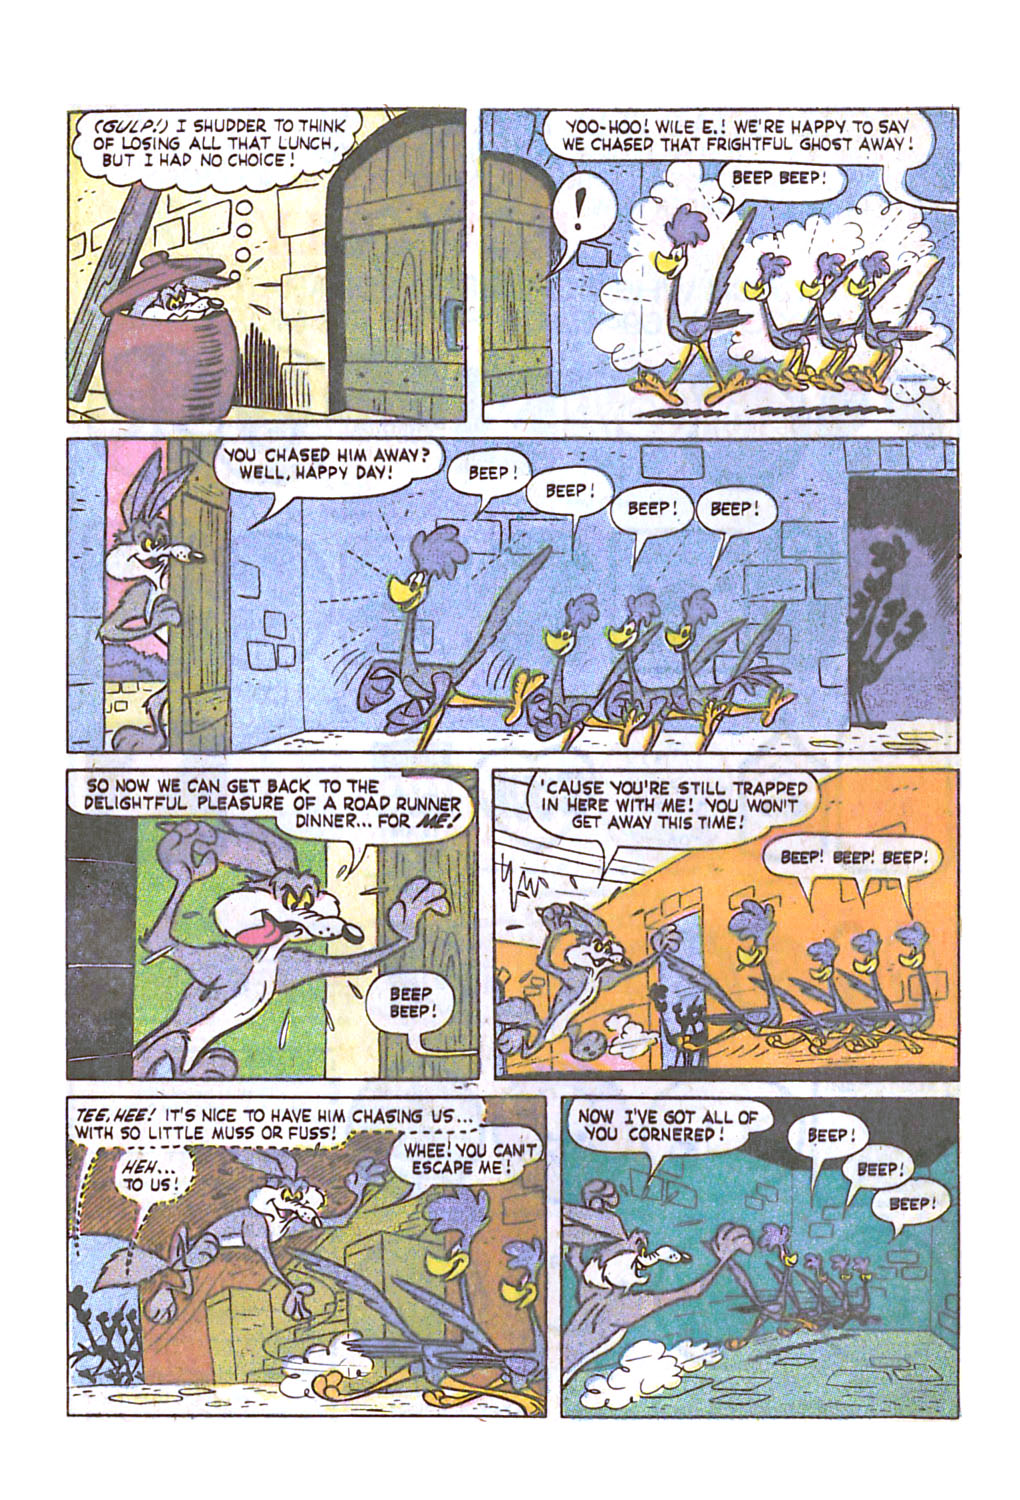 Read online Beep Beep The Road Runner comic -  Issue #45 - 8